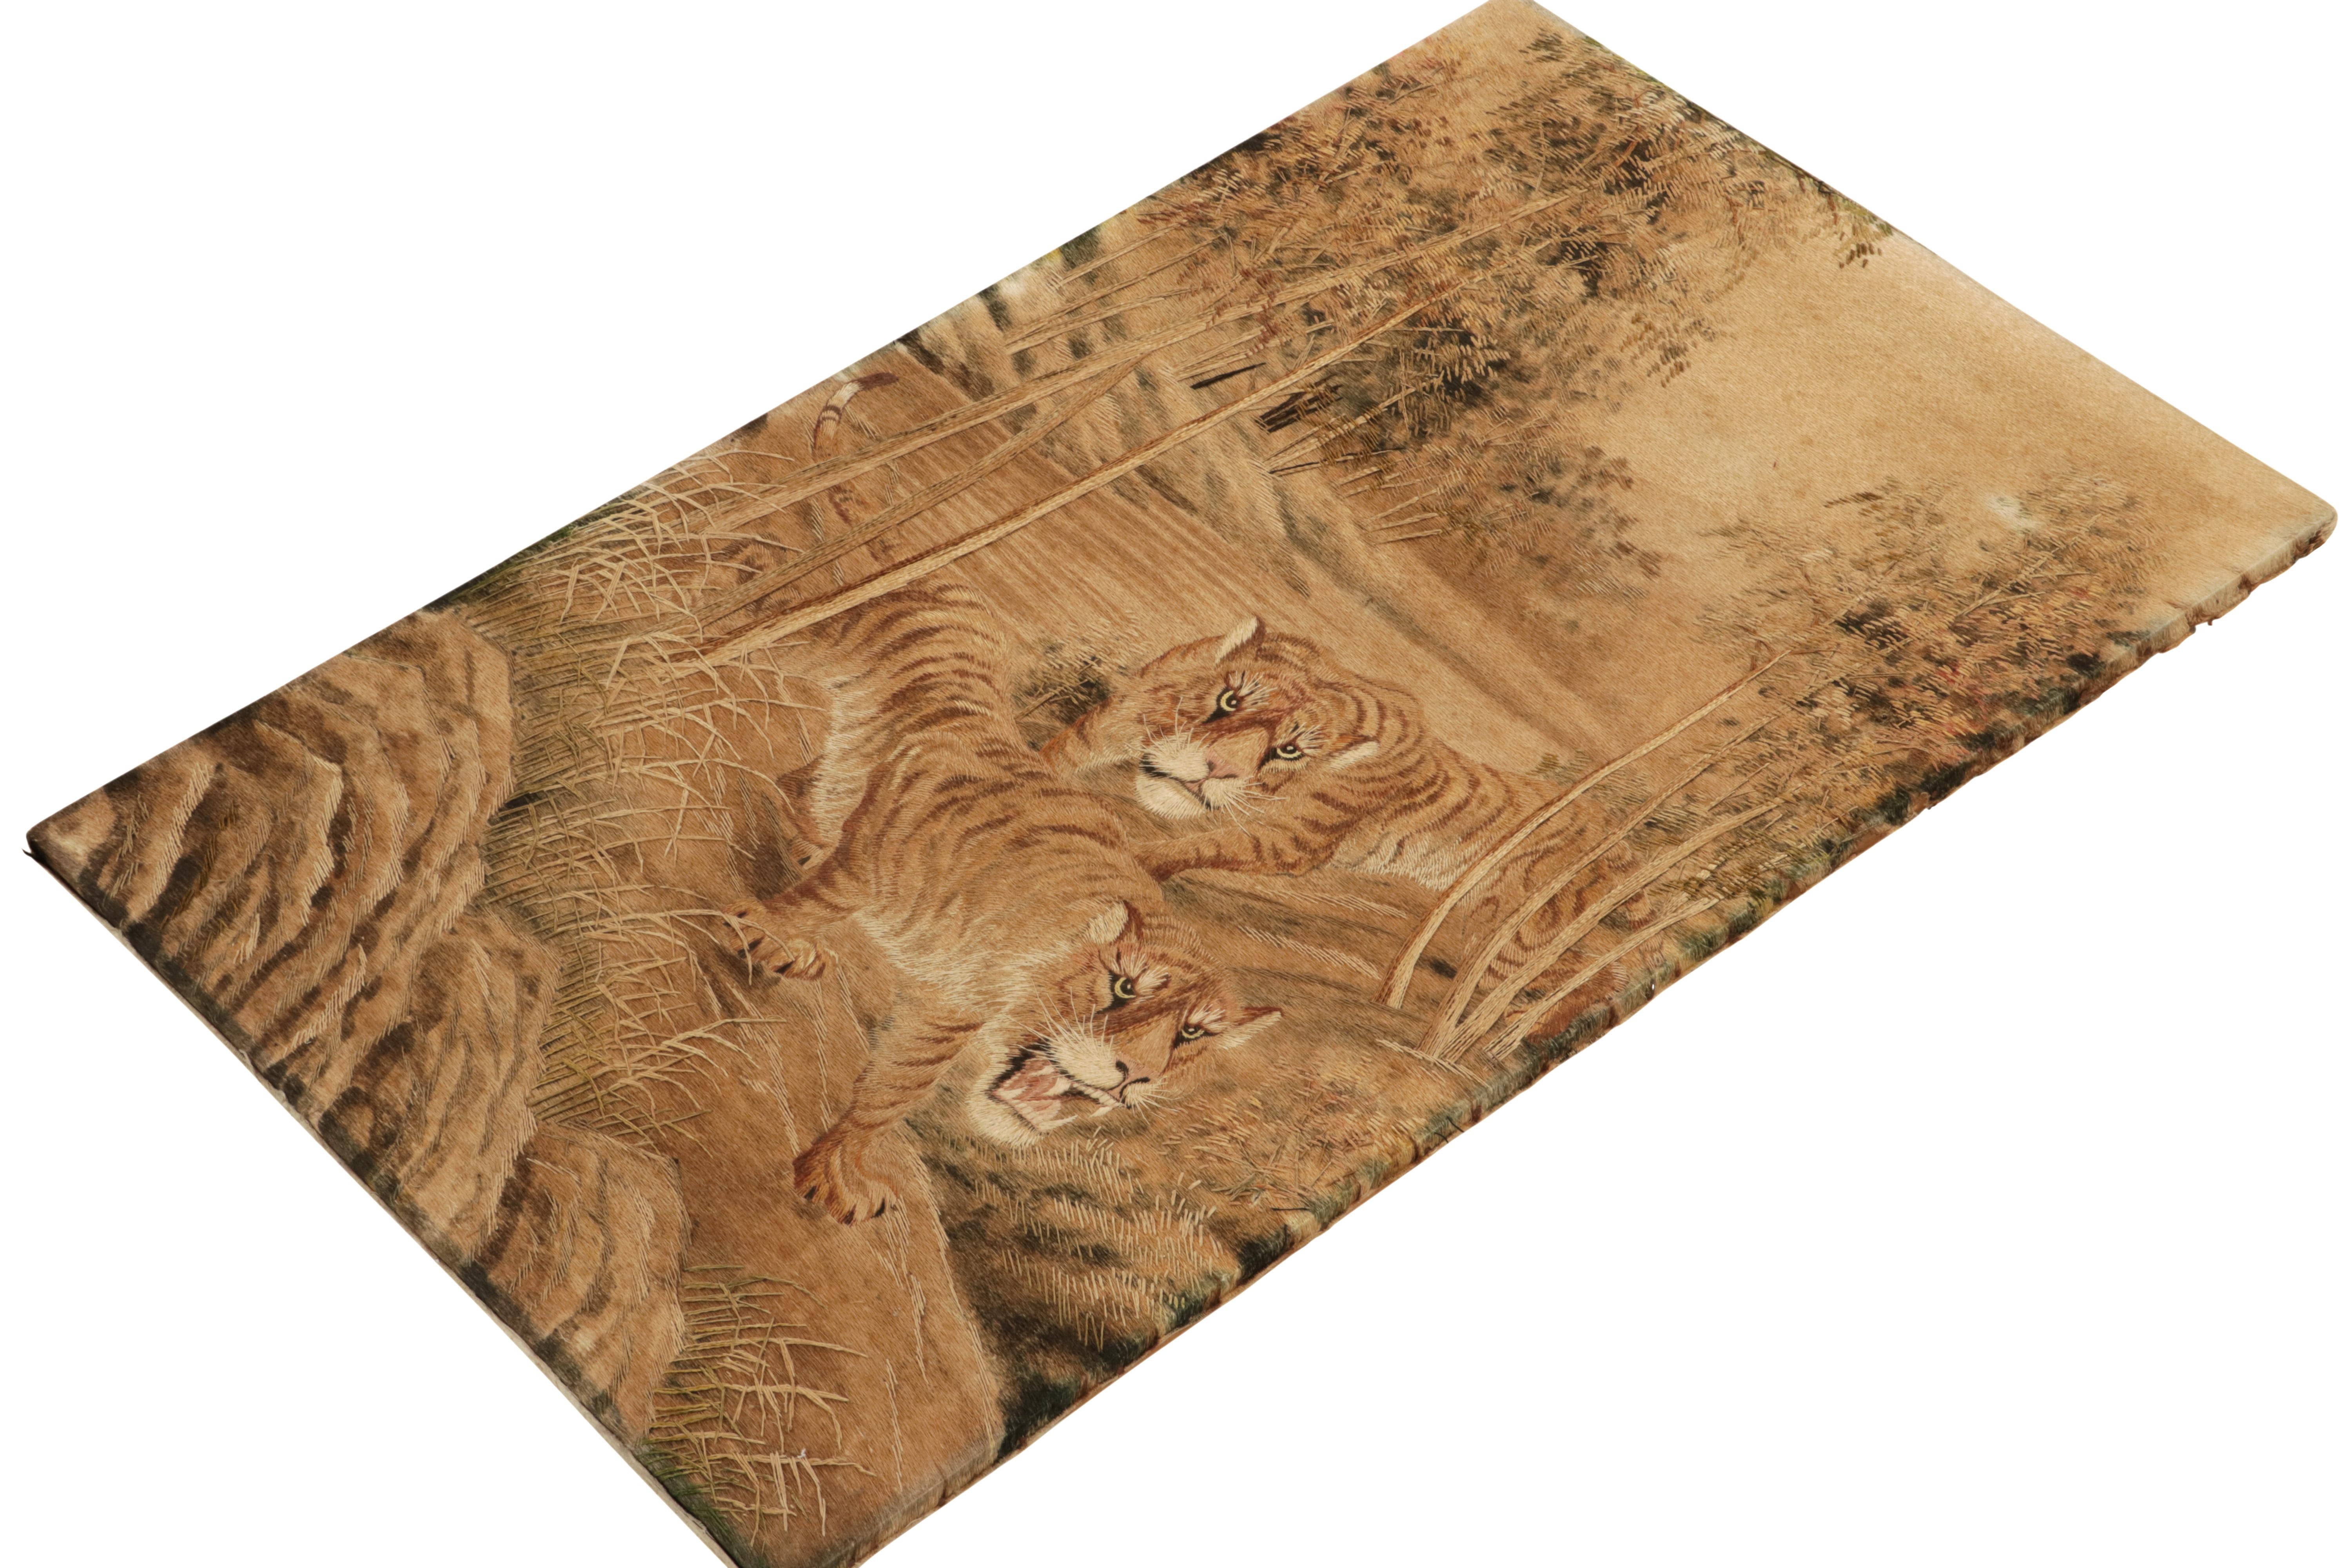 From the most collectible new curations, an antique 3x5 pictorial tapestry from Japan, handwoven in silk circa 1890-1900. 

On the Design: This coveted turn-of-the-century work enjoys a bold depiction of tigers on a forest path. A keen eye may